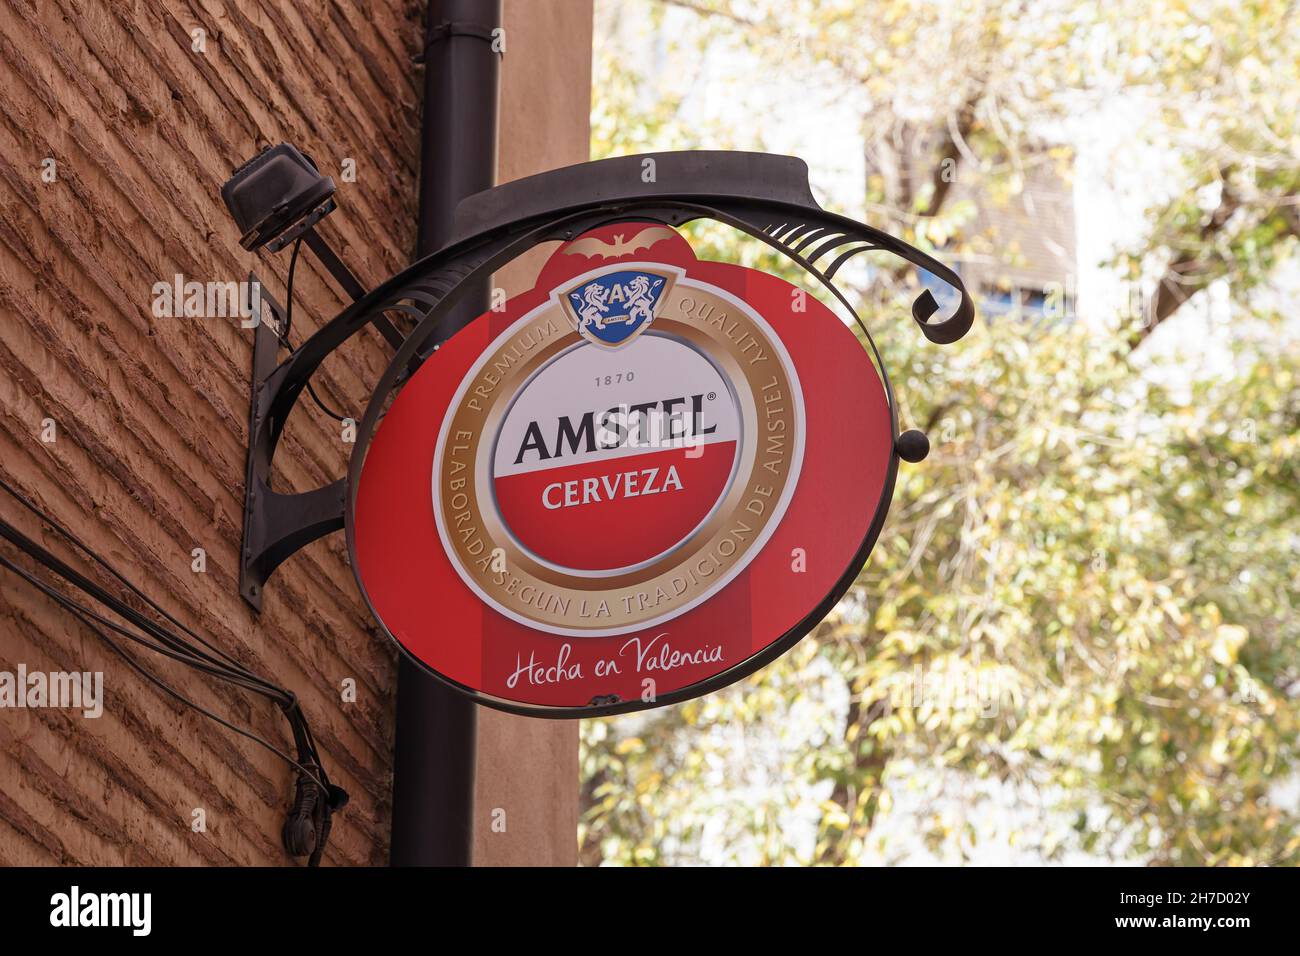 VALENCIA, SPAIN - NOVEMBER 19, 2021: Amstel is a Dutch brewery founded in 1870, owned by Heineken International since 1968 Stock Photo